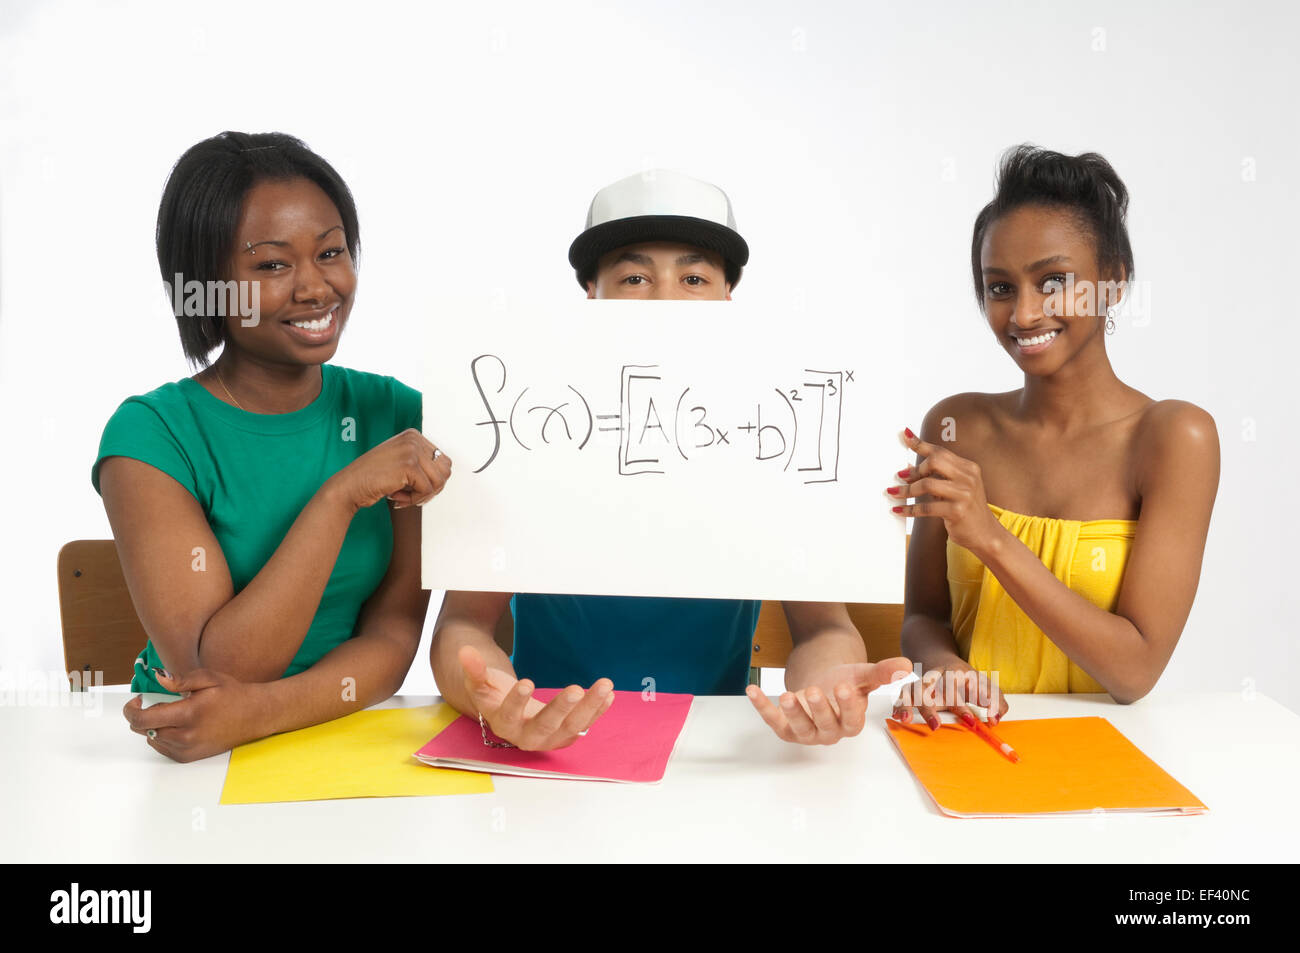 Two young woman holding a sign with a math equation on it Stock Photo